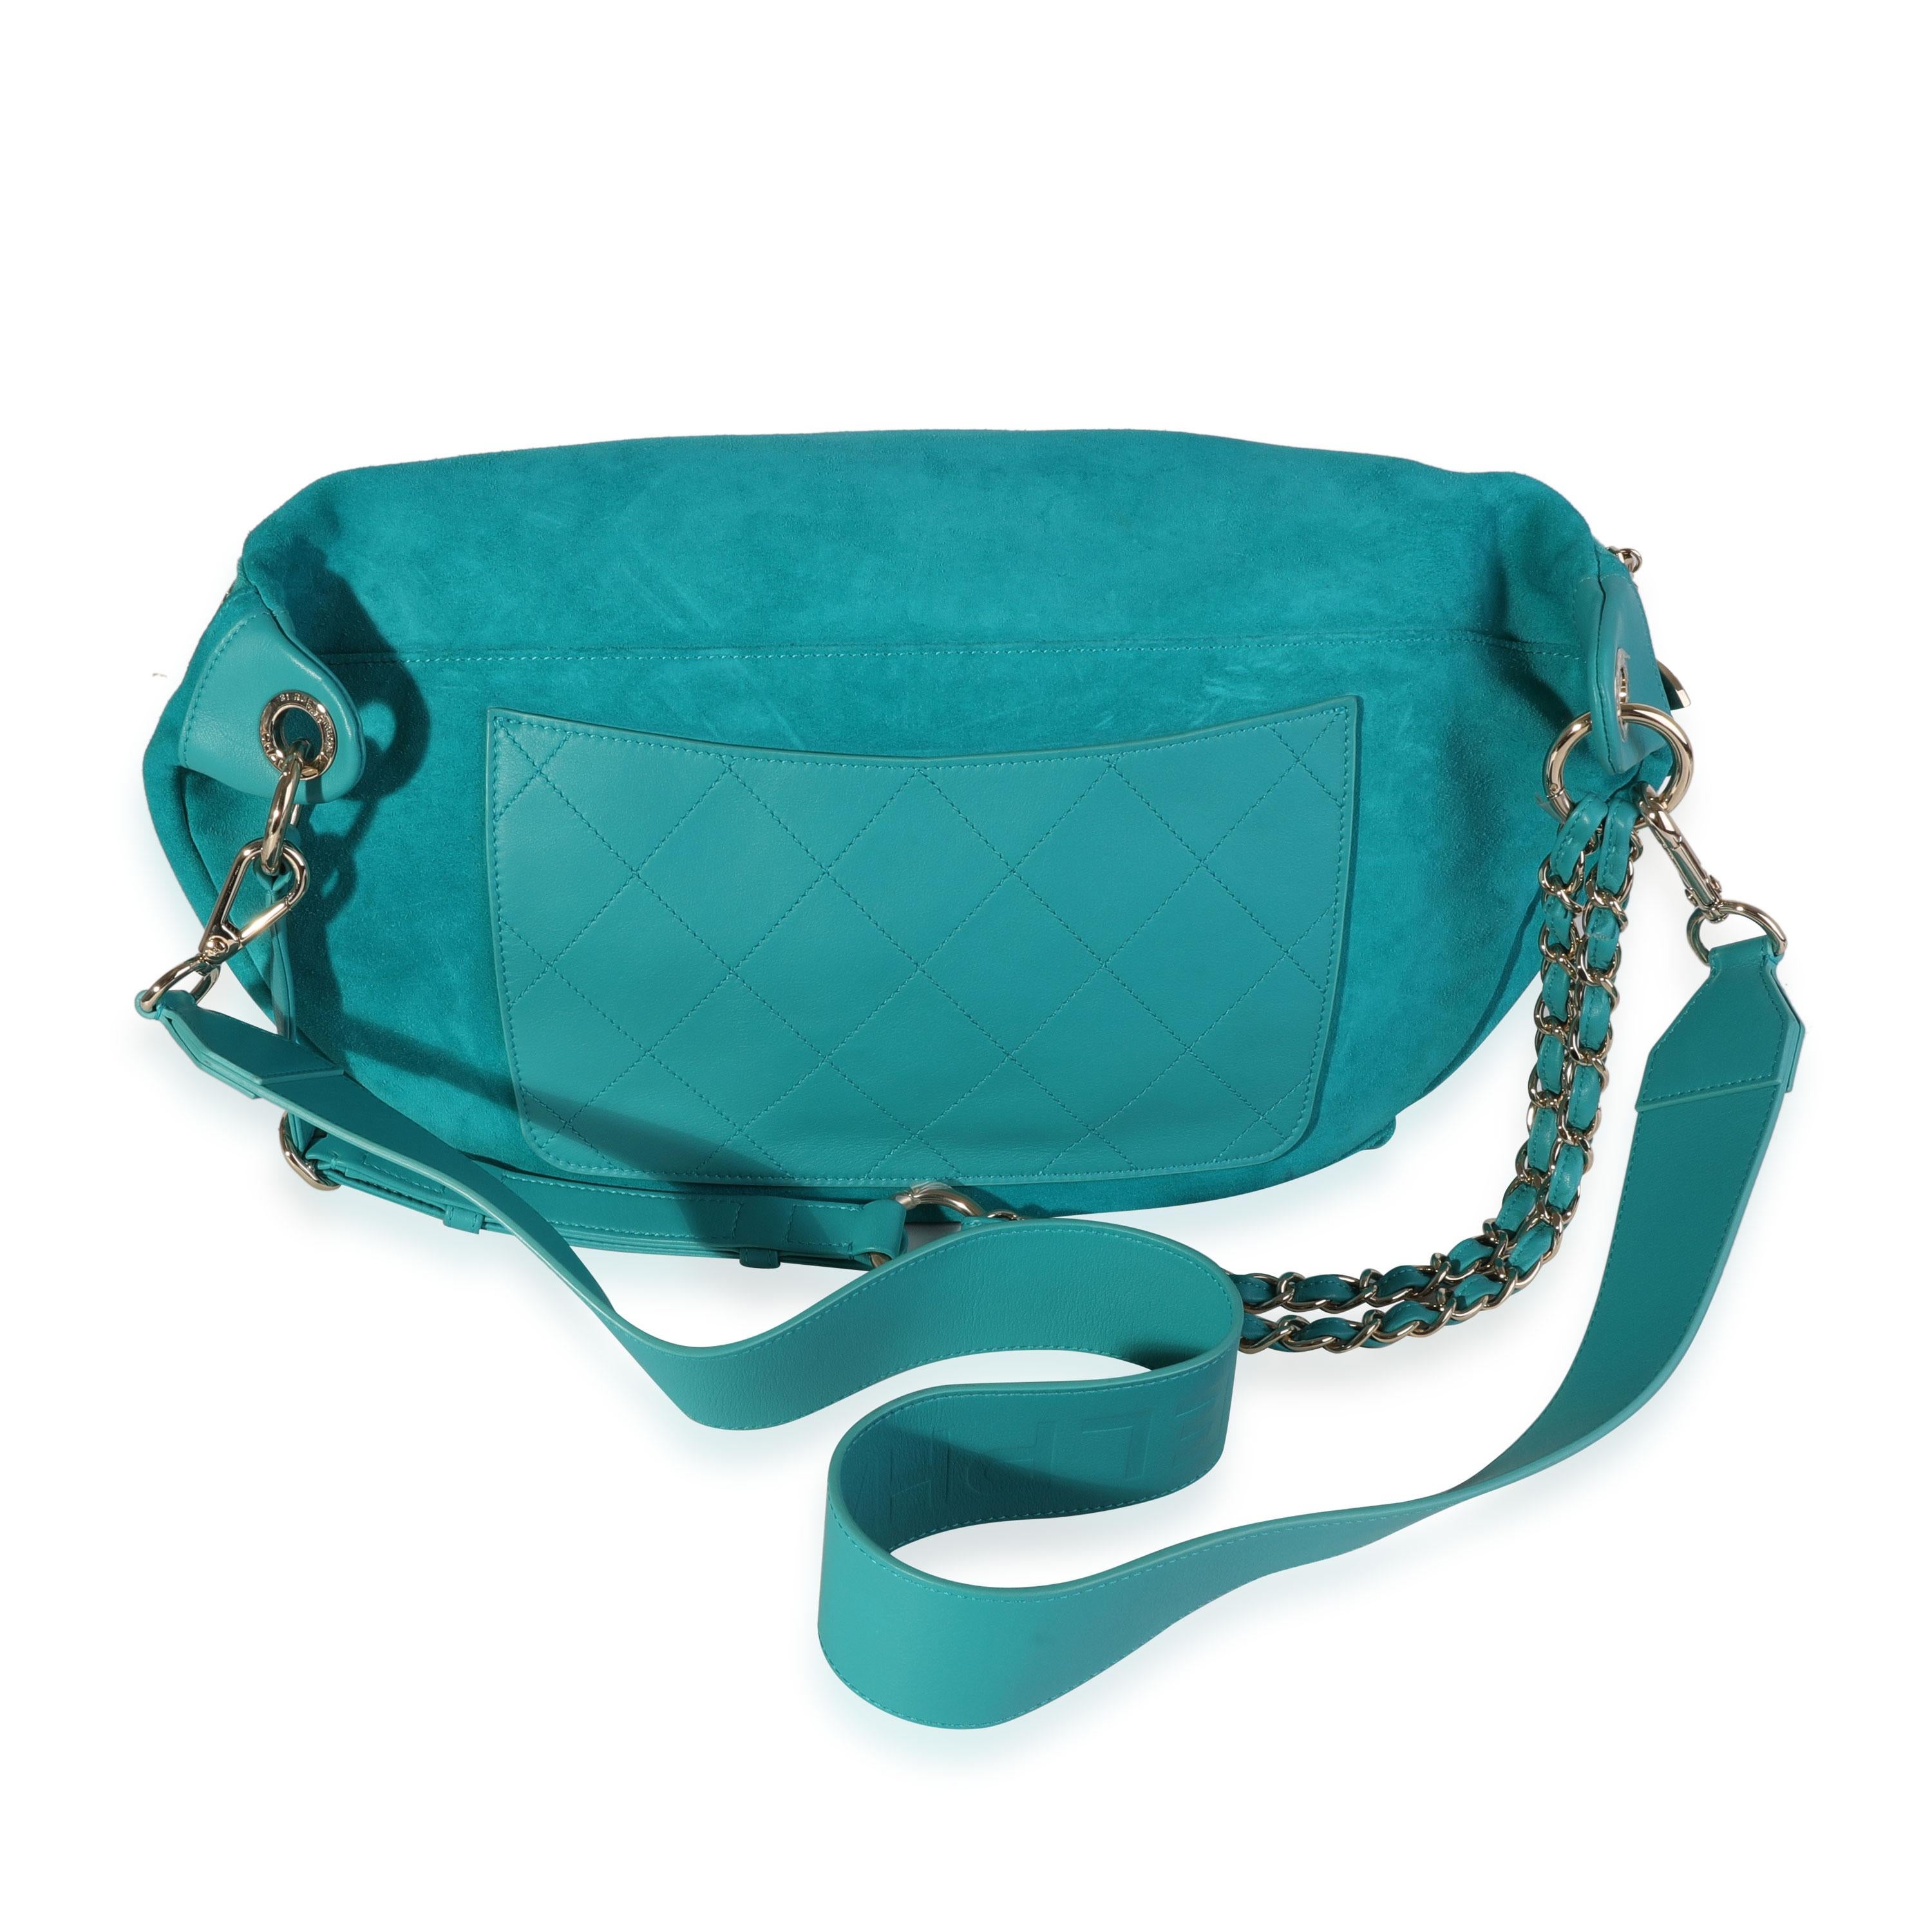 Listing Title: Chanel x Pharrell Williams Teal Suede & Quilted Calfskin Oversize Waist Bag
SKU: 119972
MSRP: 6900.00
Condition: Pre-owned (3000)
Handbag Condition: Excellent
Condition Comments: Excellent Condition. Plastic on some hardware. Light